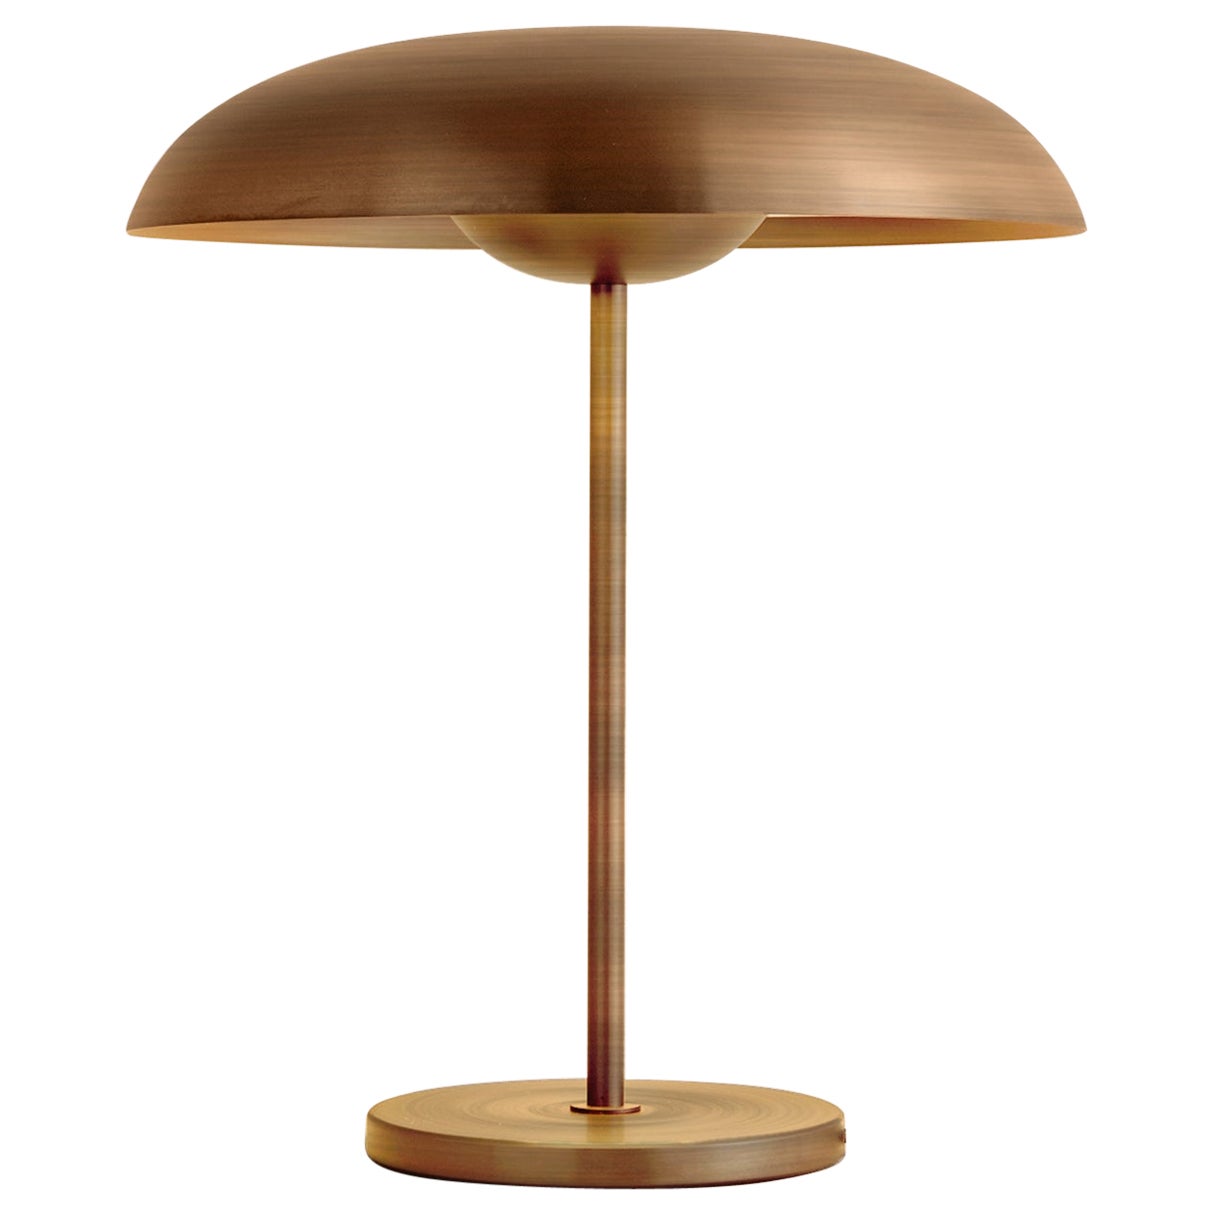 'Cosmic Solstice Antique' Table Lamp, Handmade Brushed Medium Bronze Table Light For Sale